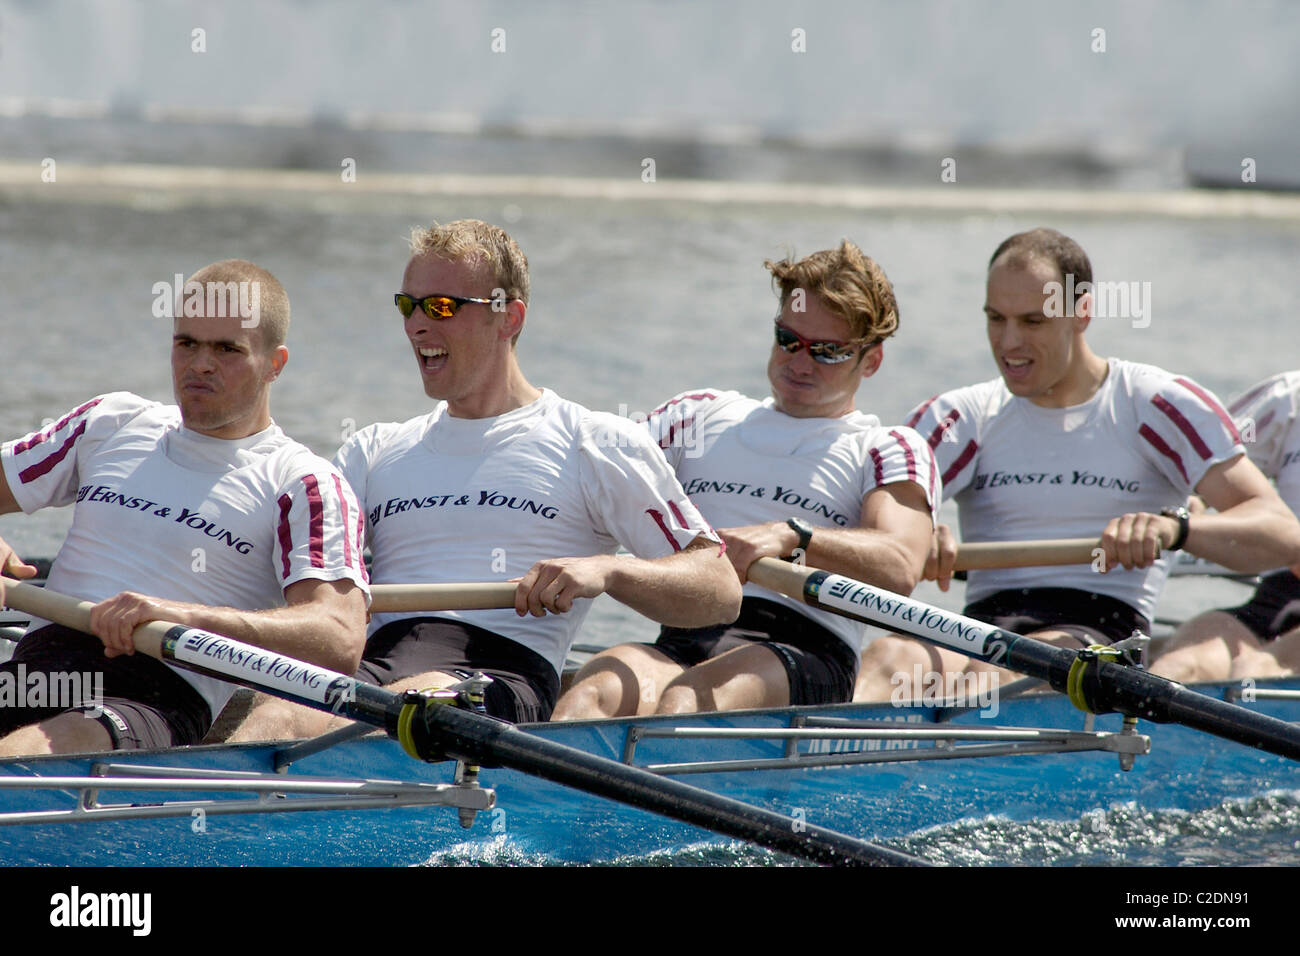 Men rowing during Henley Royal Regatta week at Henley on Thames in Oxfordshire England UK Stock Photo